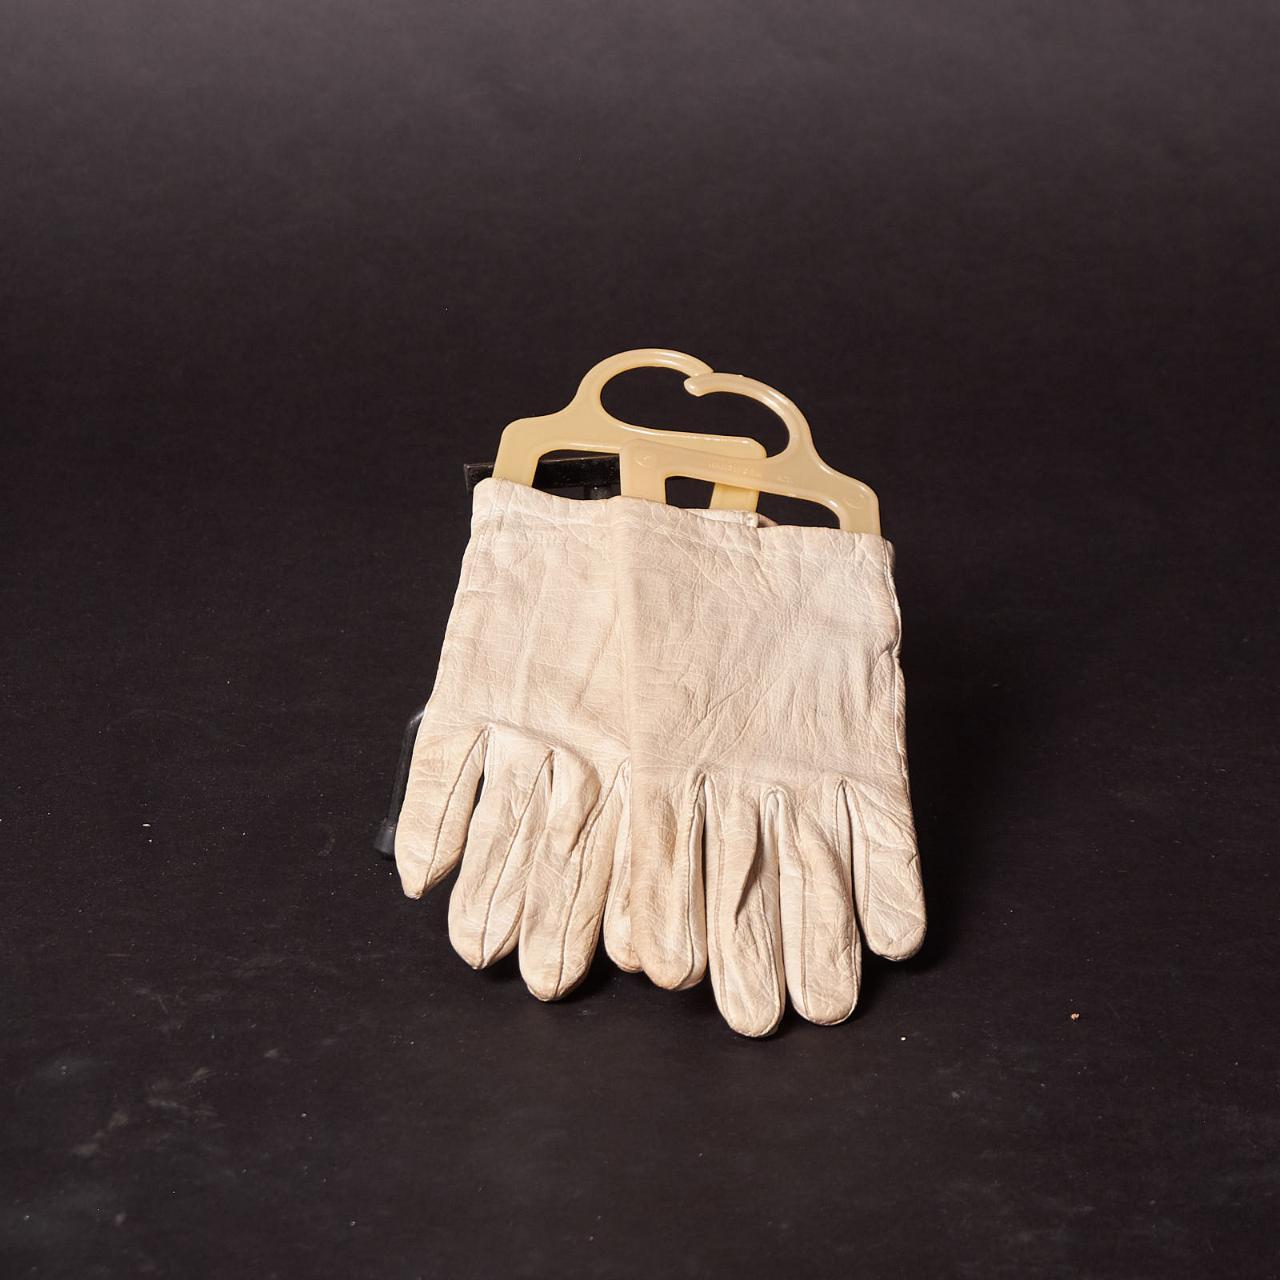 Cleaning and Conditioning a Glove from the 1950s! 